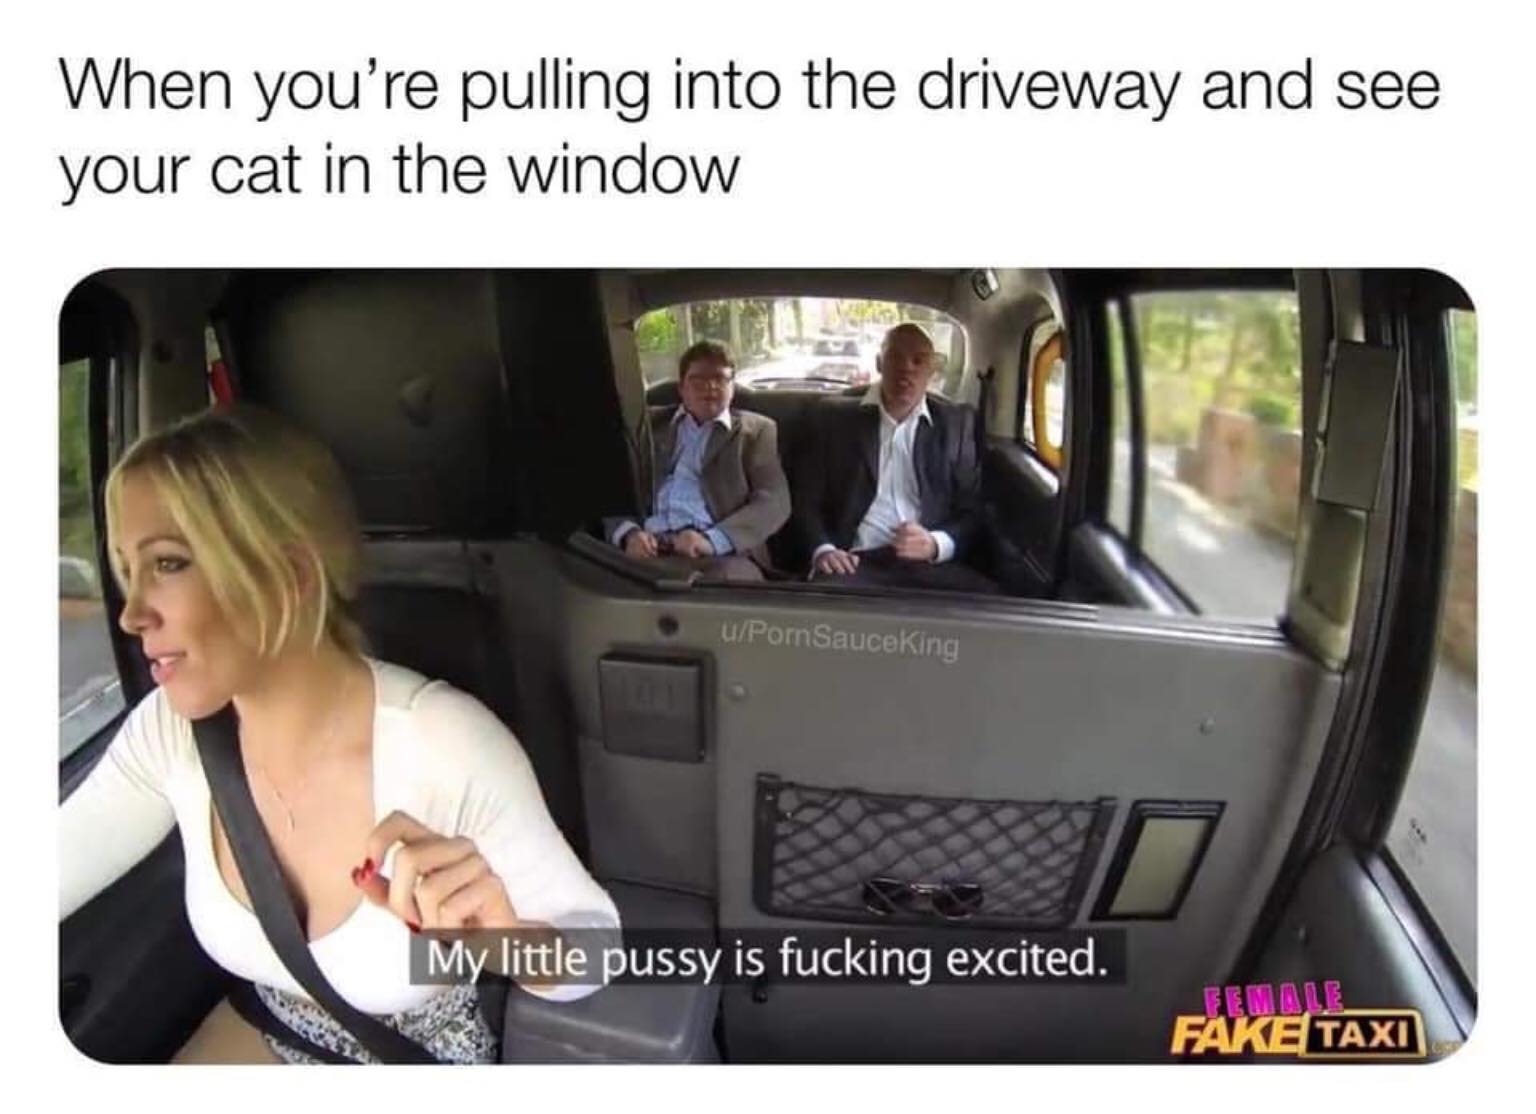 car - When you're pulling into the driveway and see your cat in the window UPornSauceking My little pussy is fucking excited. Female Fake Taxi